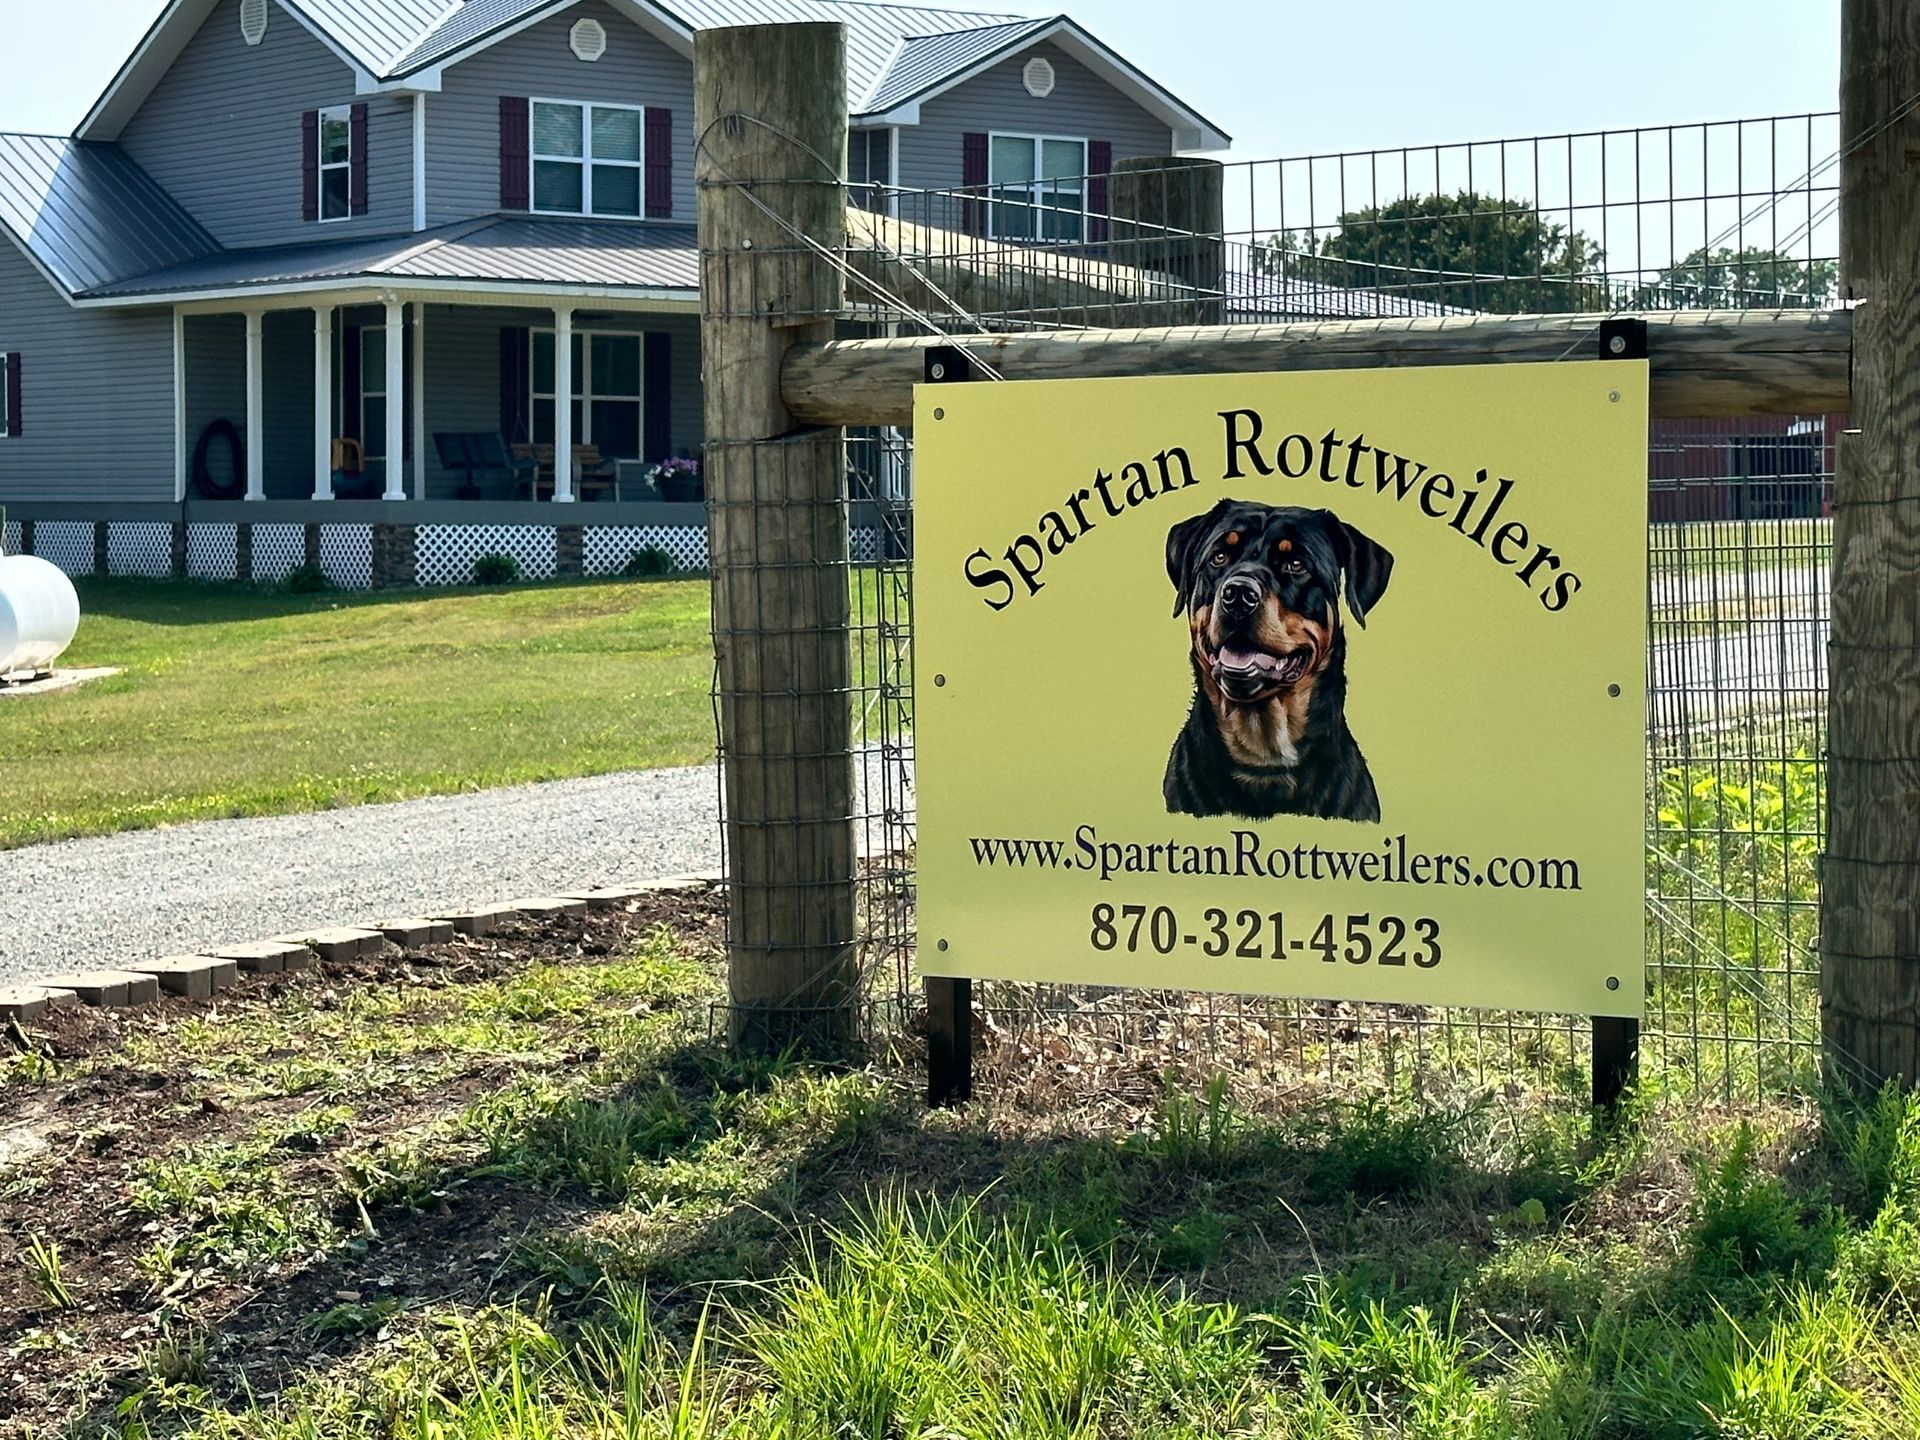 Home of Spartan Rottweilers